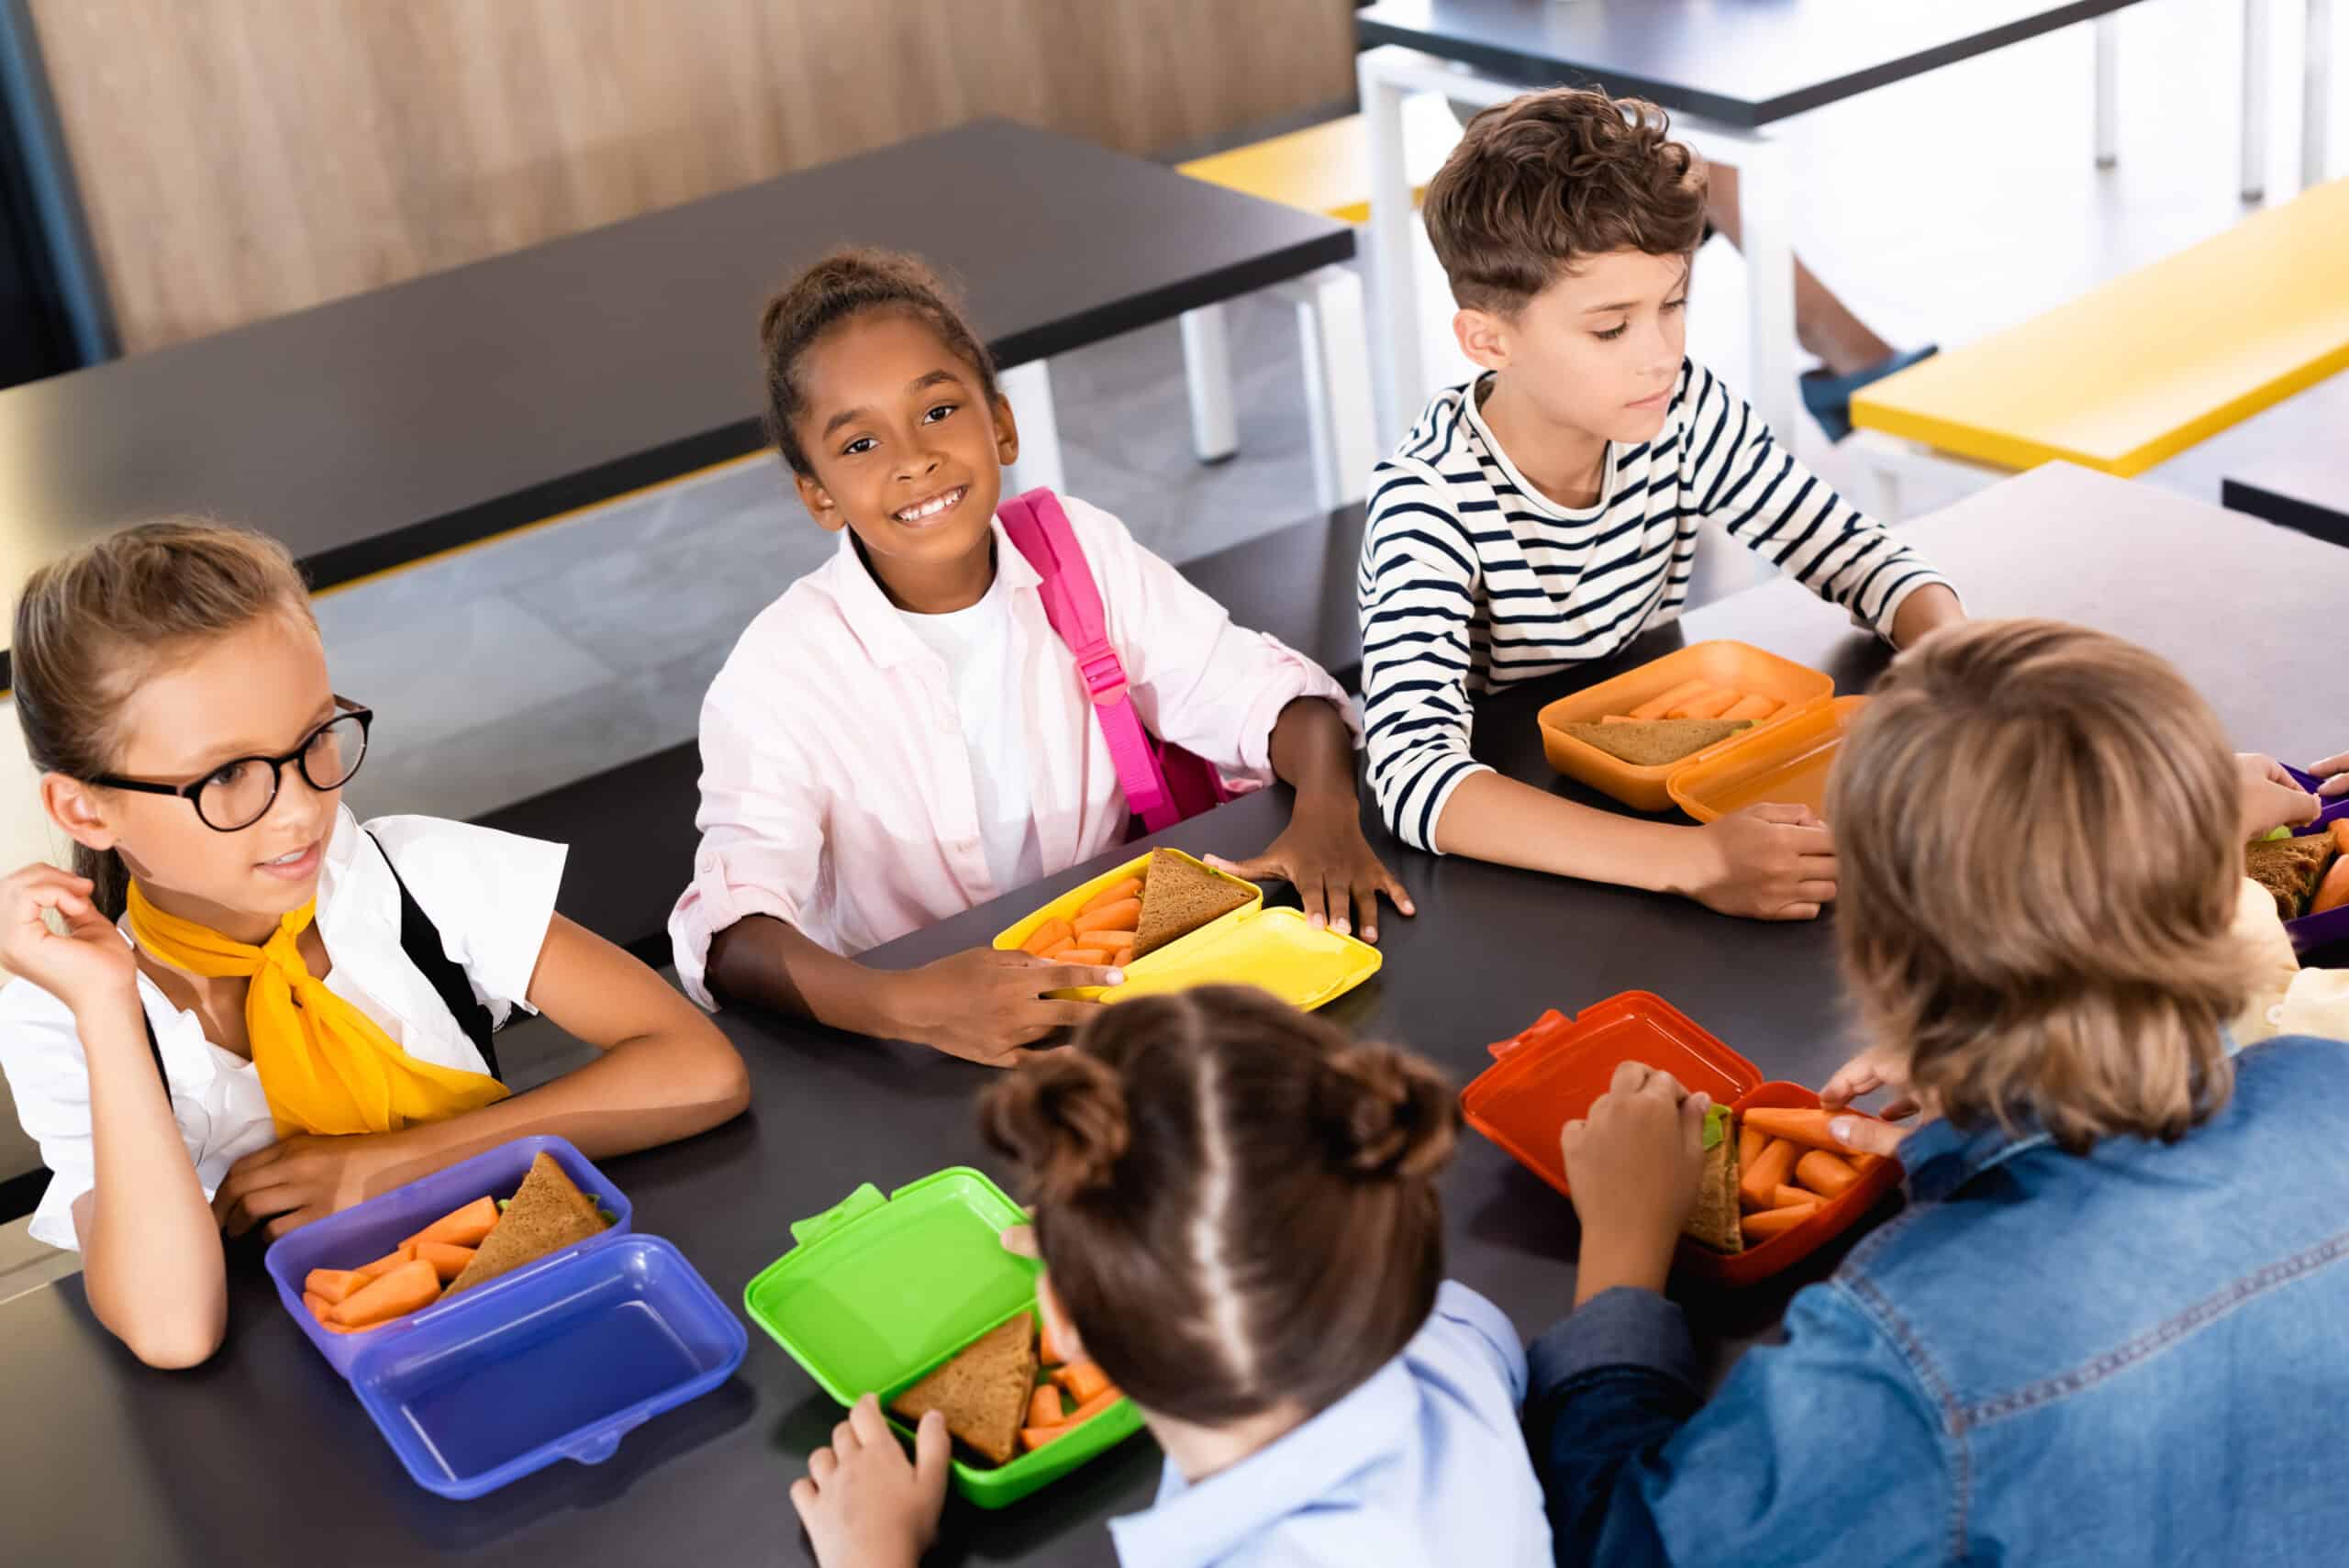 Six children eating bread and carrots out of brightly coloured lunch box while seated in a school cafeteria